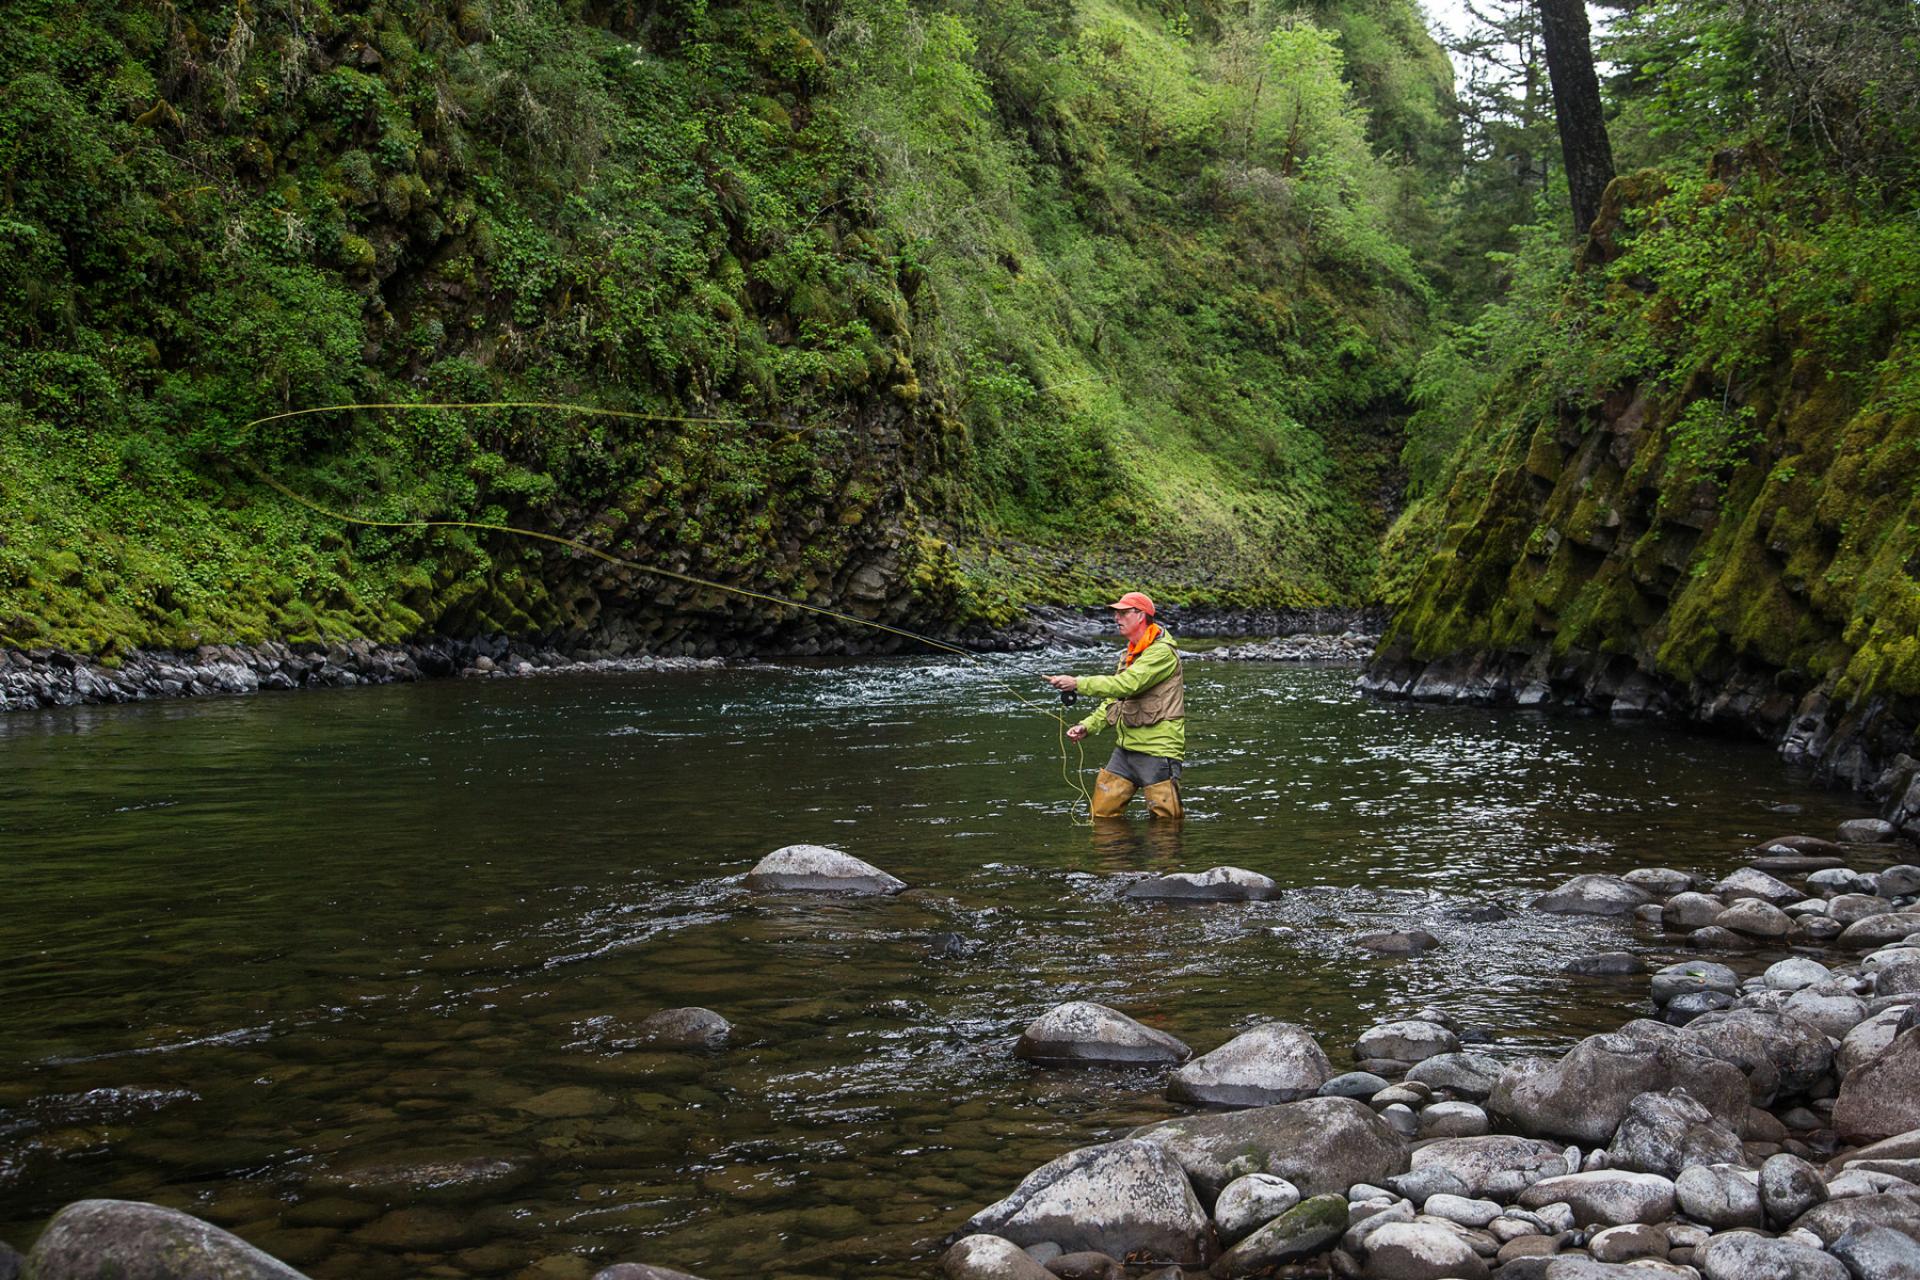 Man fishing surrounded by greenery in Molalla River Wild and Scenic River, Oregon